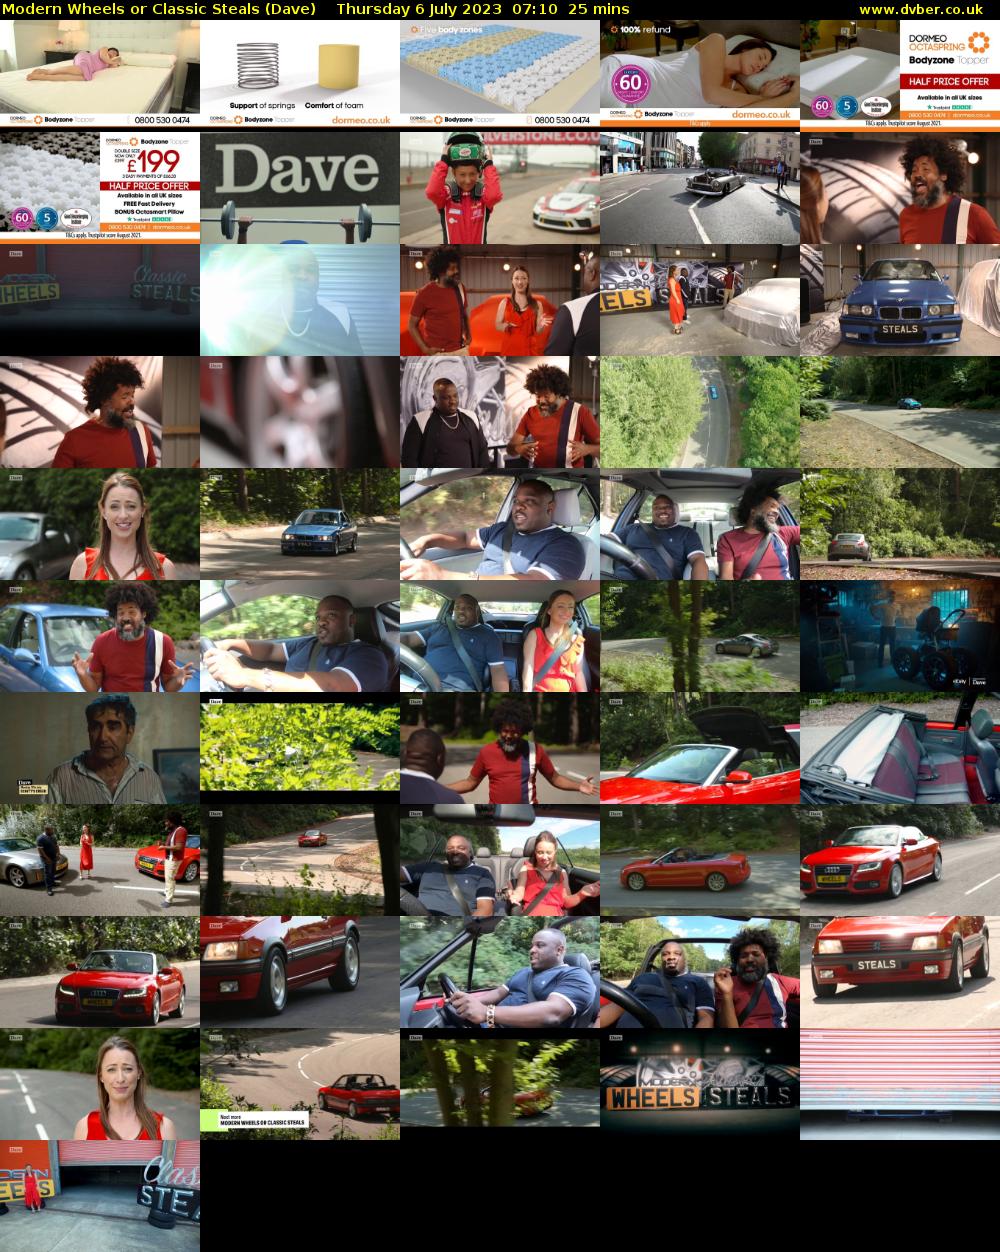 Modern Wheels or Classic Steals (Dave) Thursday 6 July 2023 07:10 - 07:35